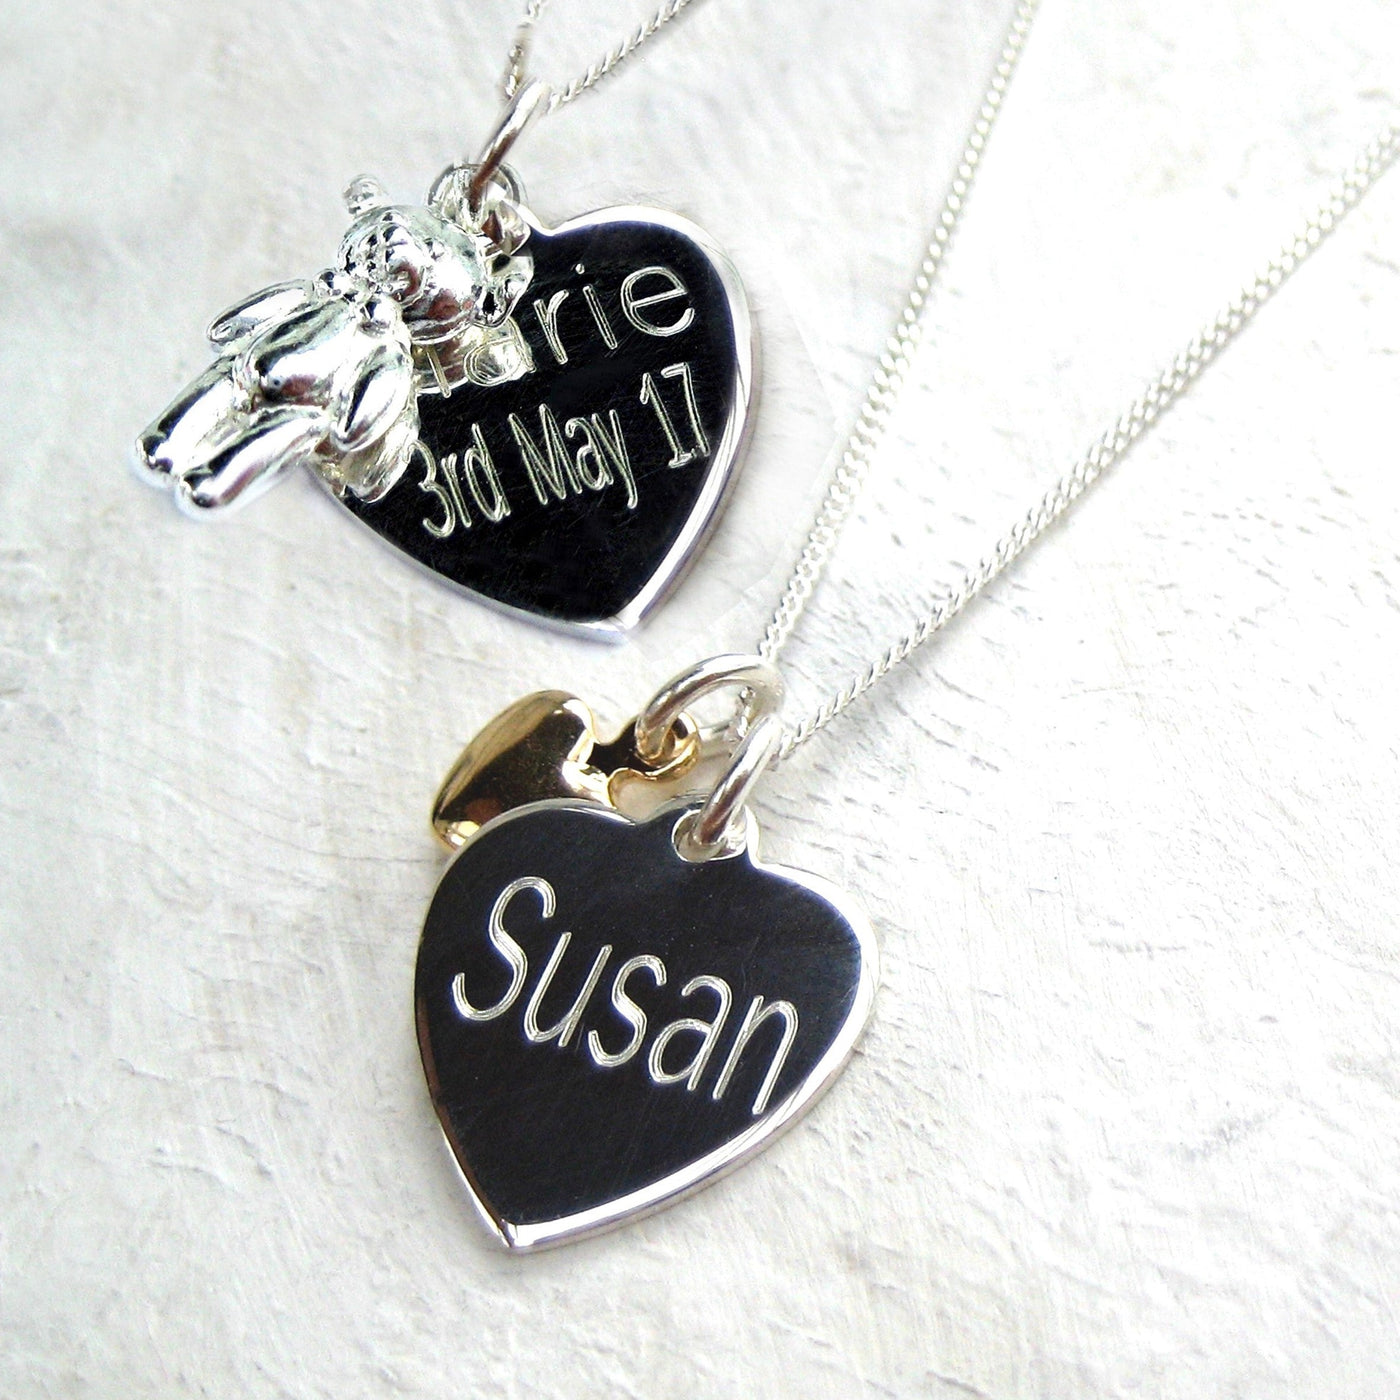 Personalised Sterling Silver Heart Mini Charm Necklace